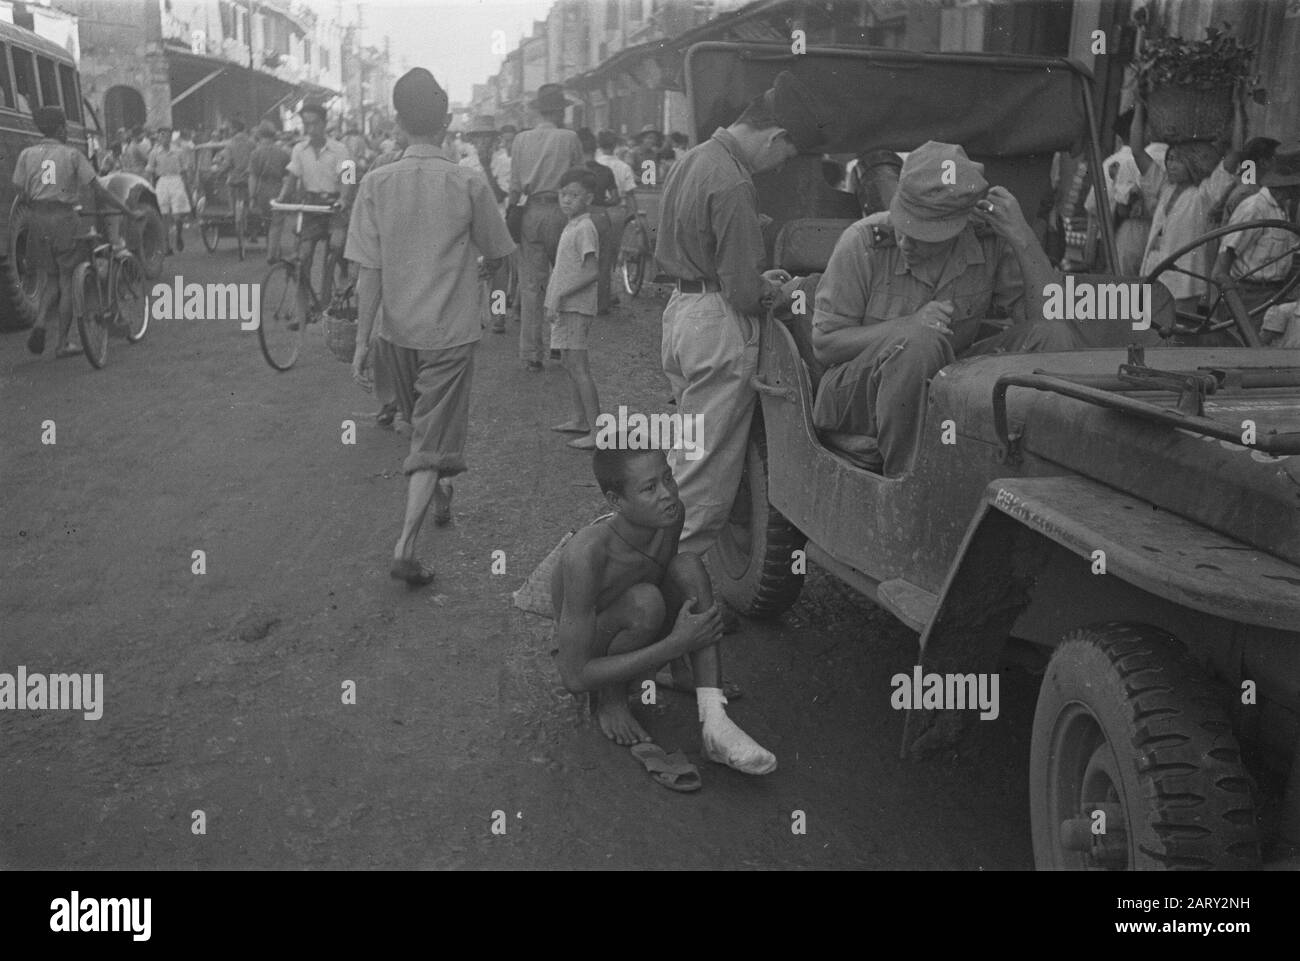 Photo Reportage Palembangs  Two Dutch soldiers, one of which a 2nd lieutenant in a jeep in a shopping street in Palembangs. A young man with an injured foot comes begging? Date: 1947 Location: Indonesia, Dutch East Indies Stock Photo